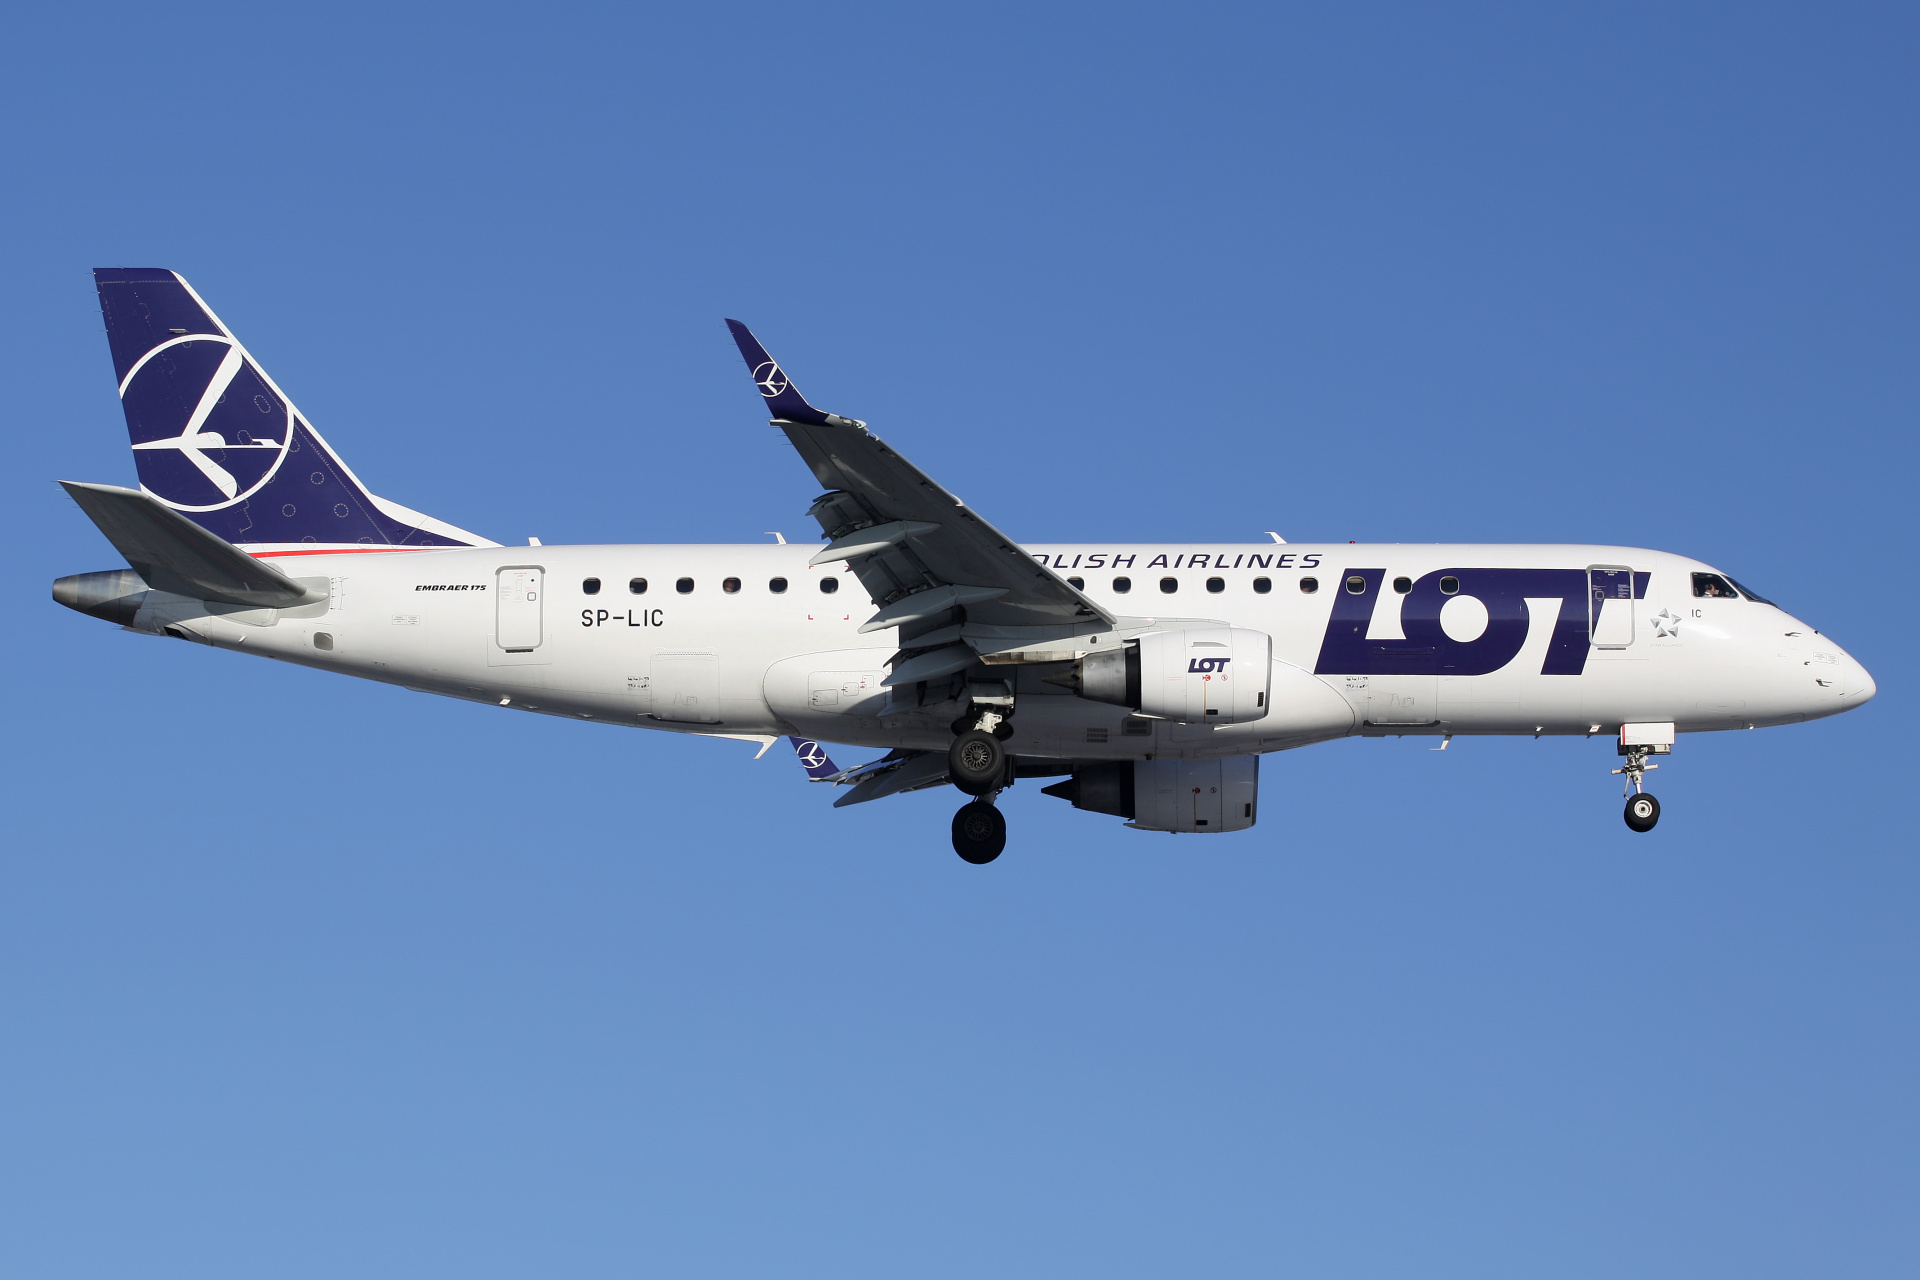 SP-LIC (new livery) (Aircraft » EPWA Spotting » Embraer E175 » LOT Polish Airlines)